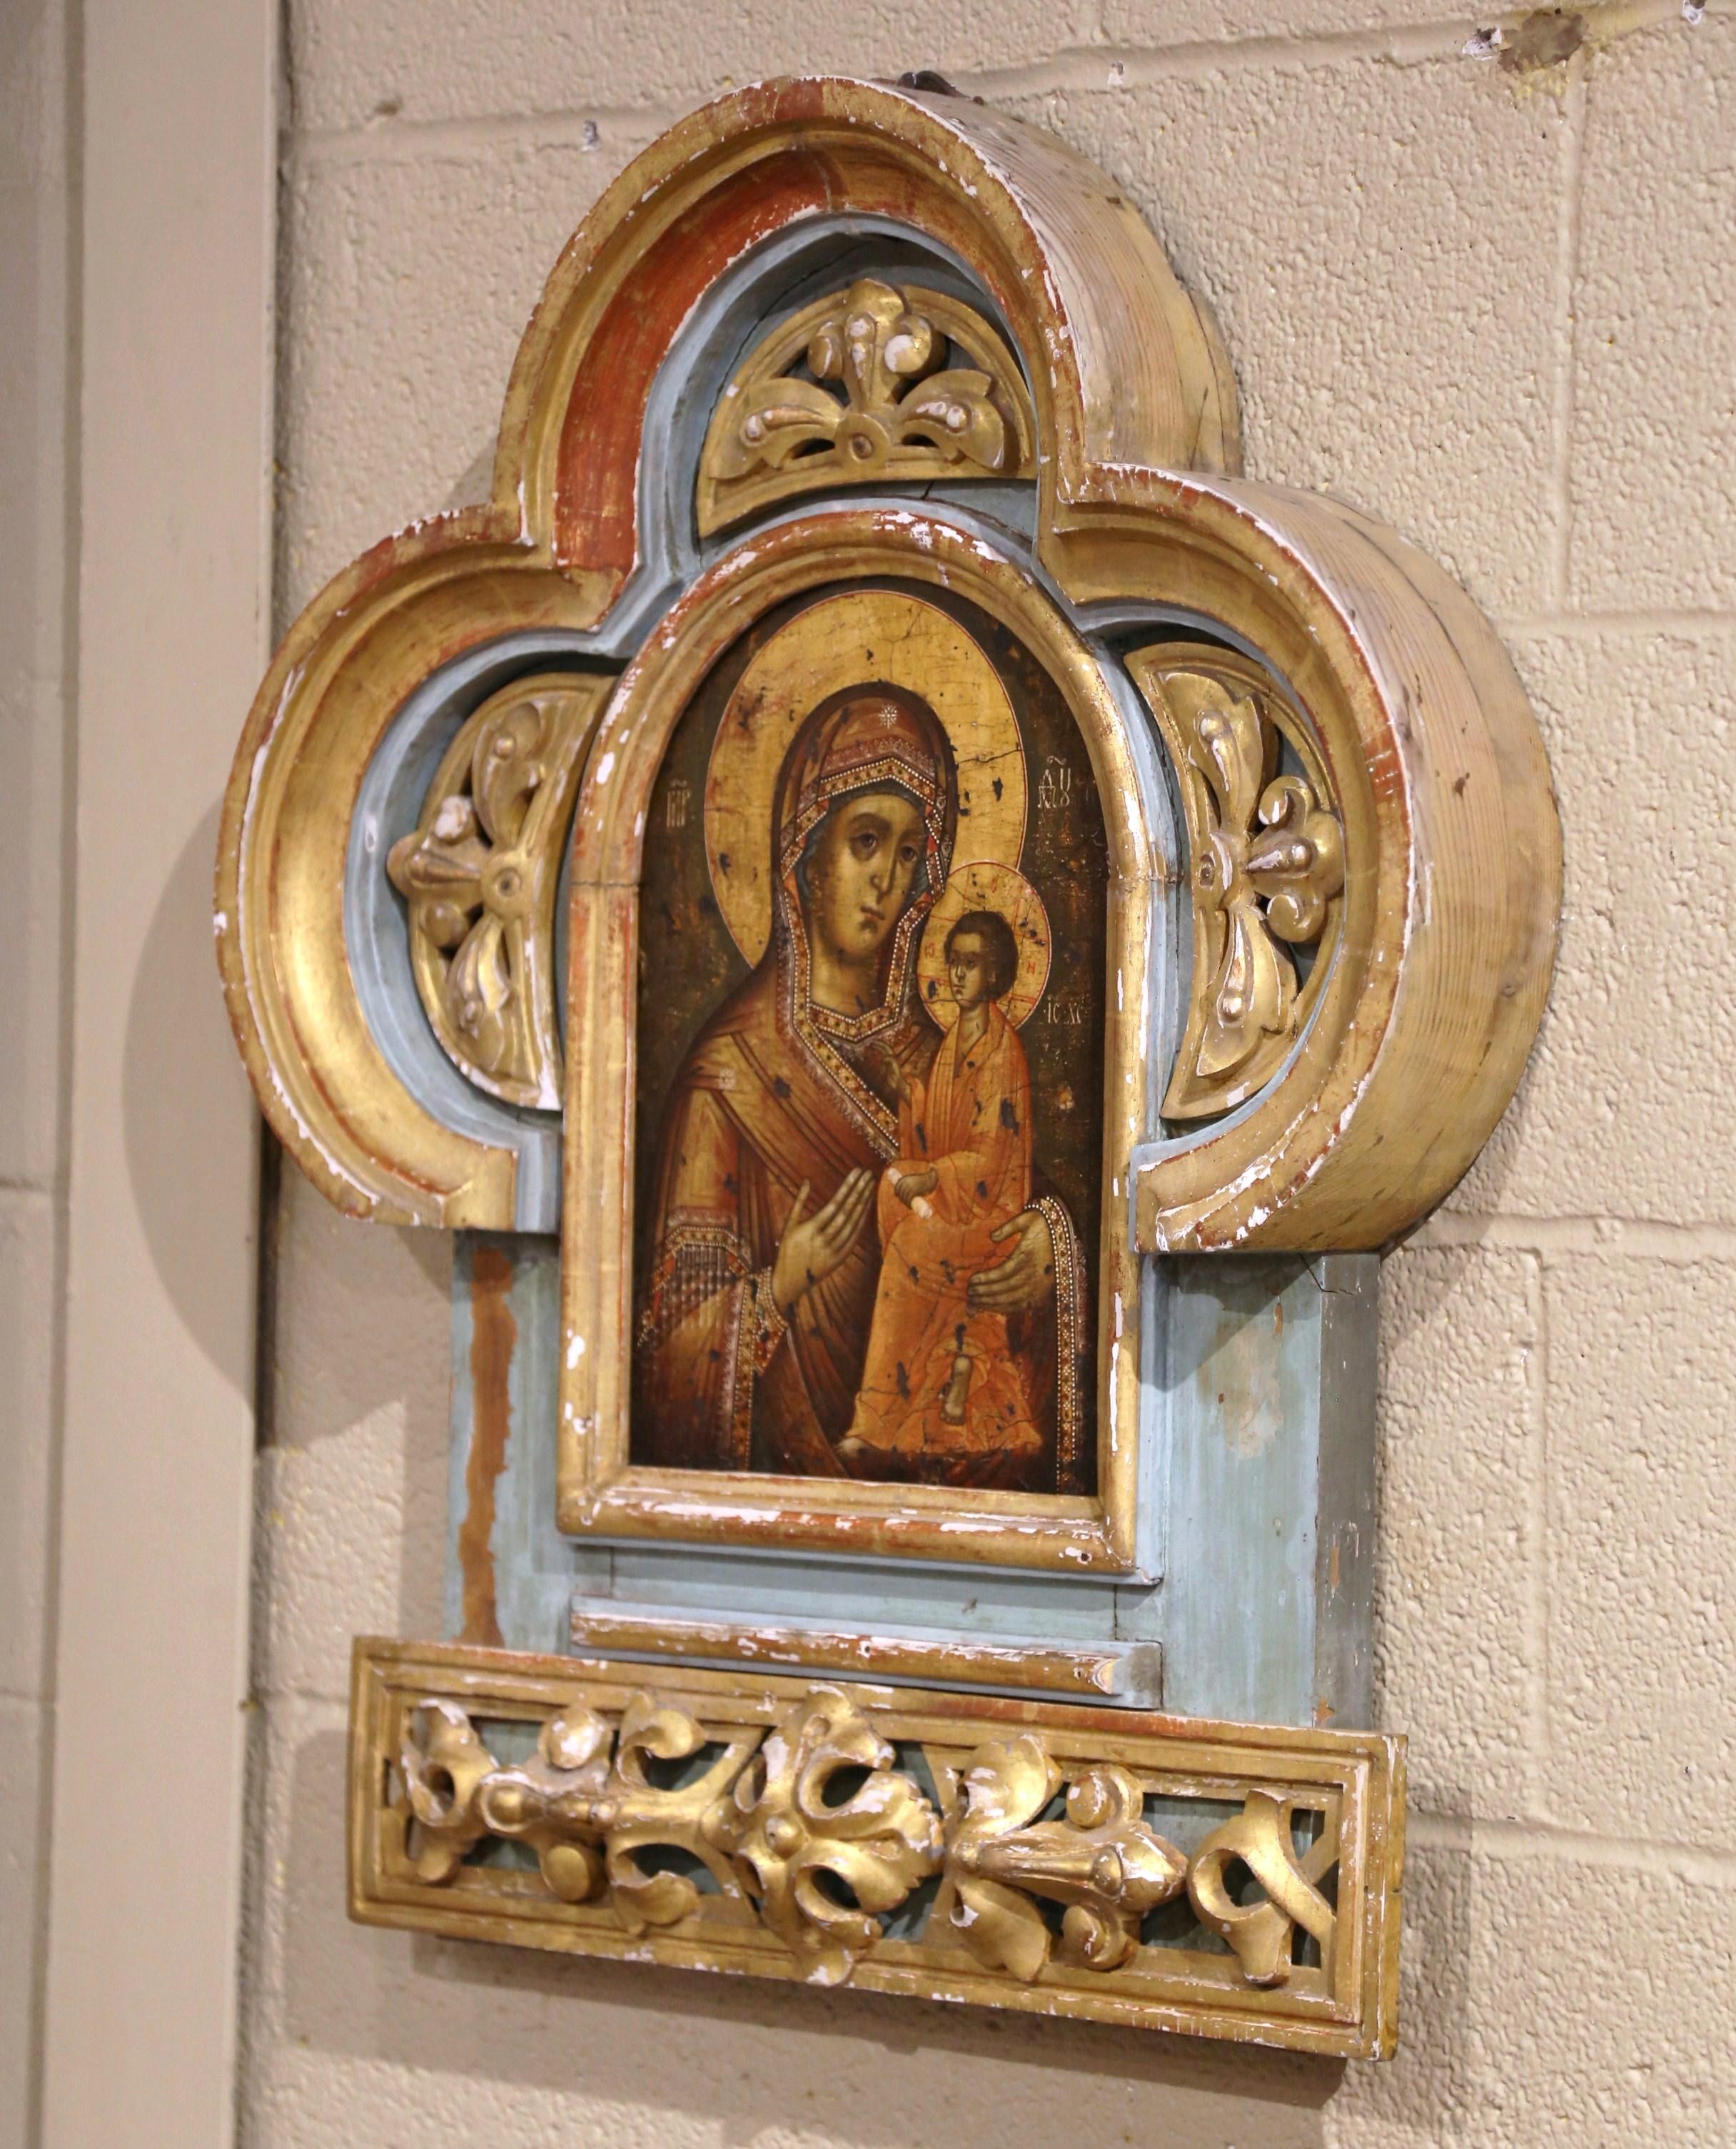 Decorate a library or study with this elegant and colorful antique wall sculpture. Crafted in Italy circa 1760, the religious gilt wood wall decor features a arched top and sides decorated with inset hand carved leaf motifs medallions. The center is